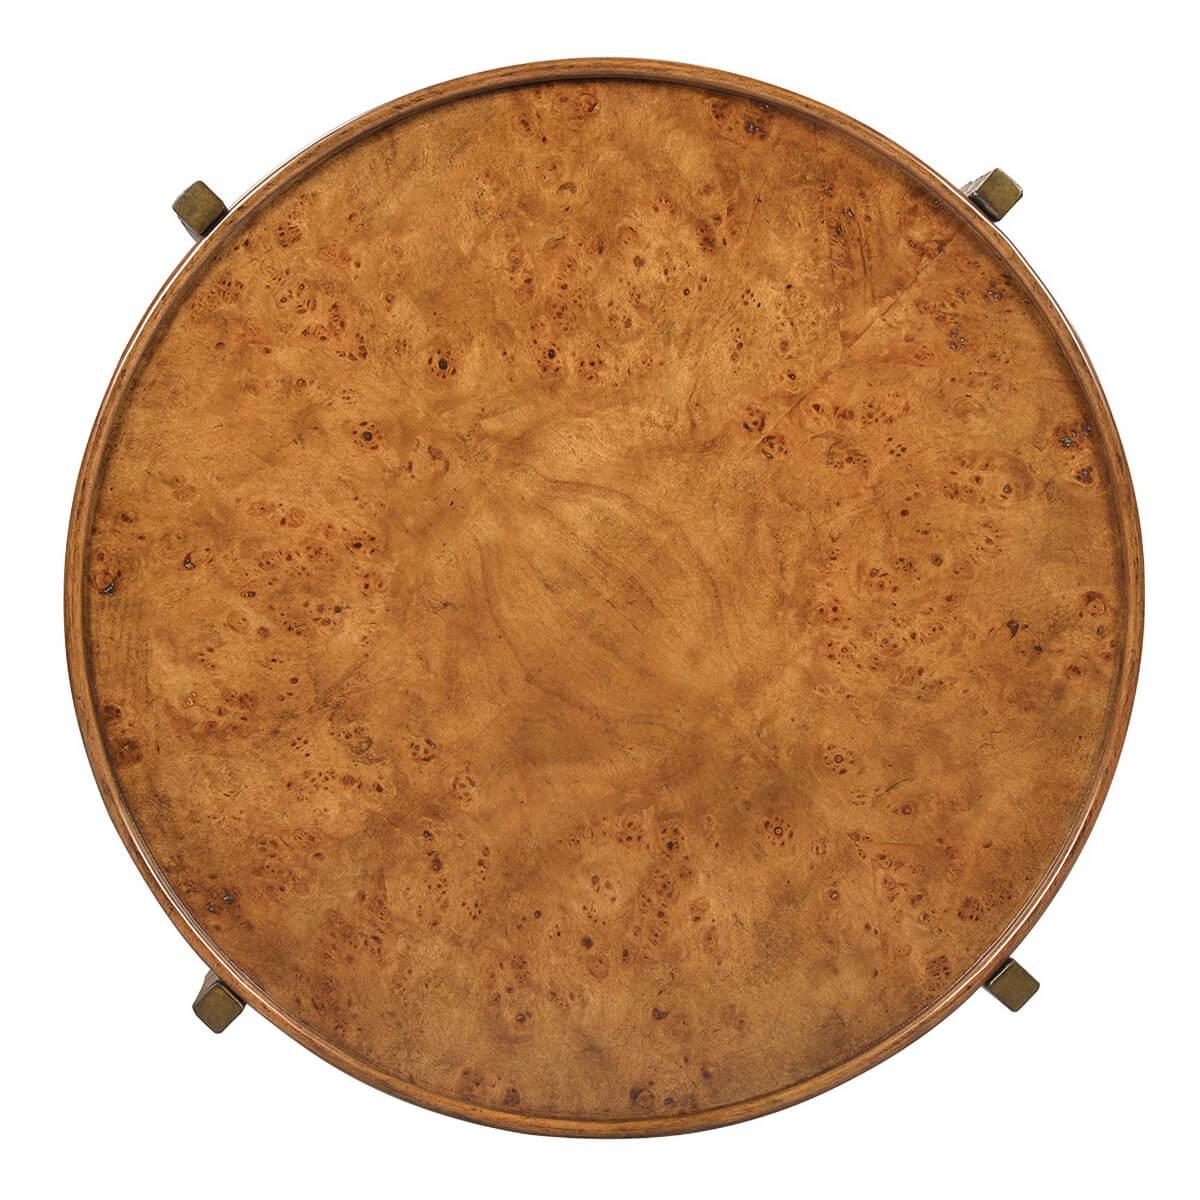 An organic modern round side table with a burl dish top, supported by bronzed finish metal tapered organic columns with an X-stretcher.

Dimensions: 26